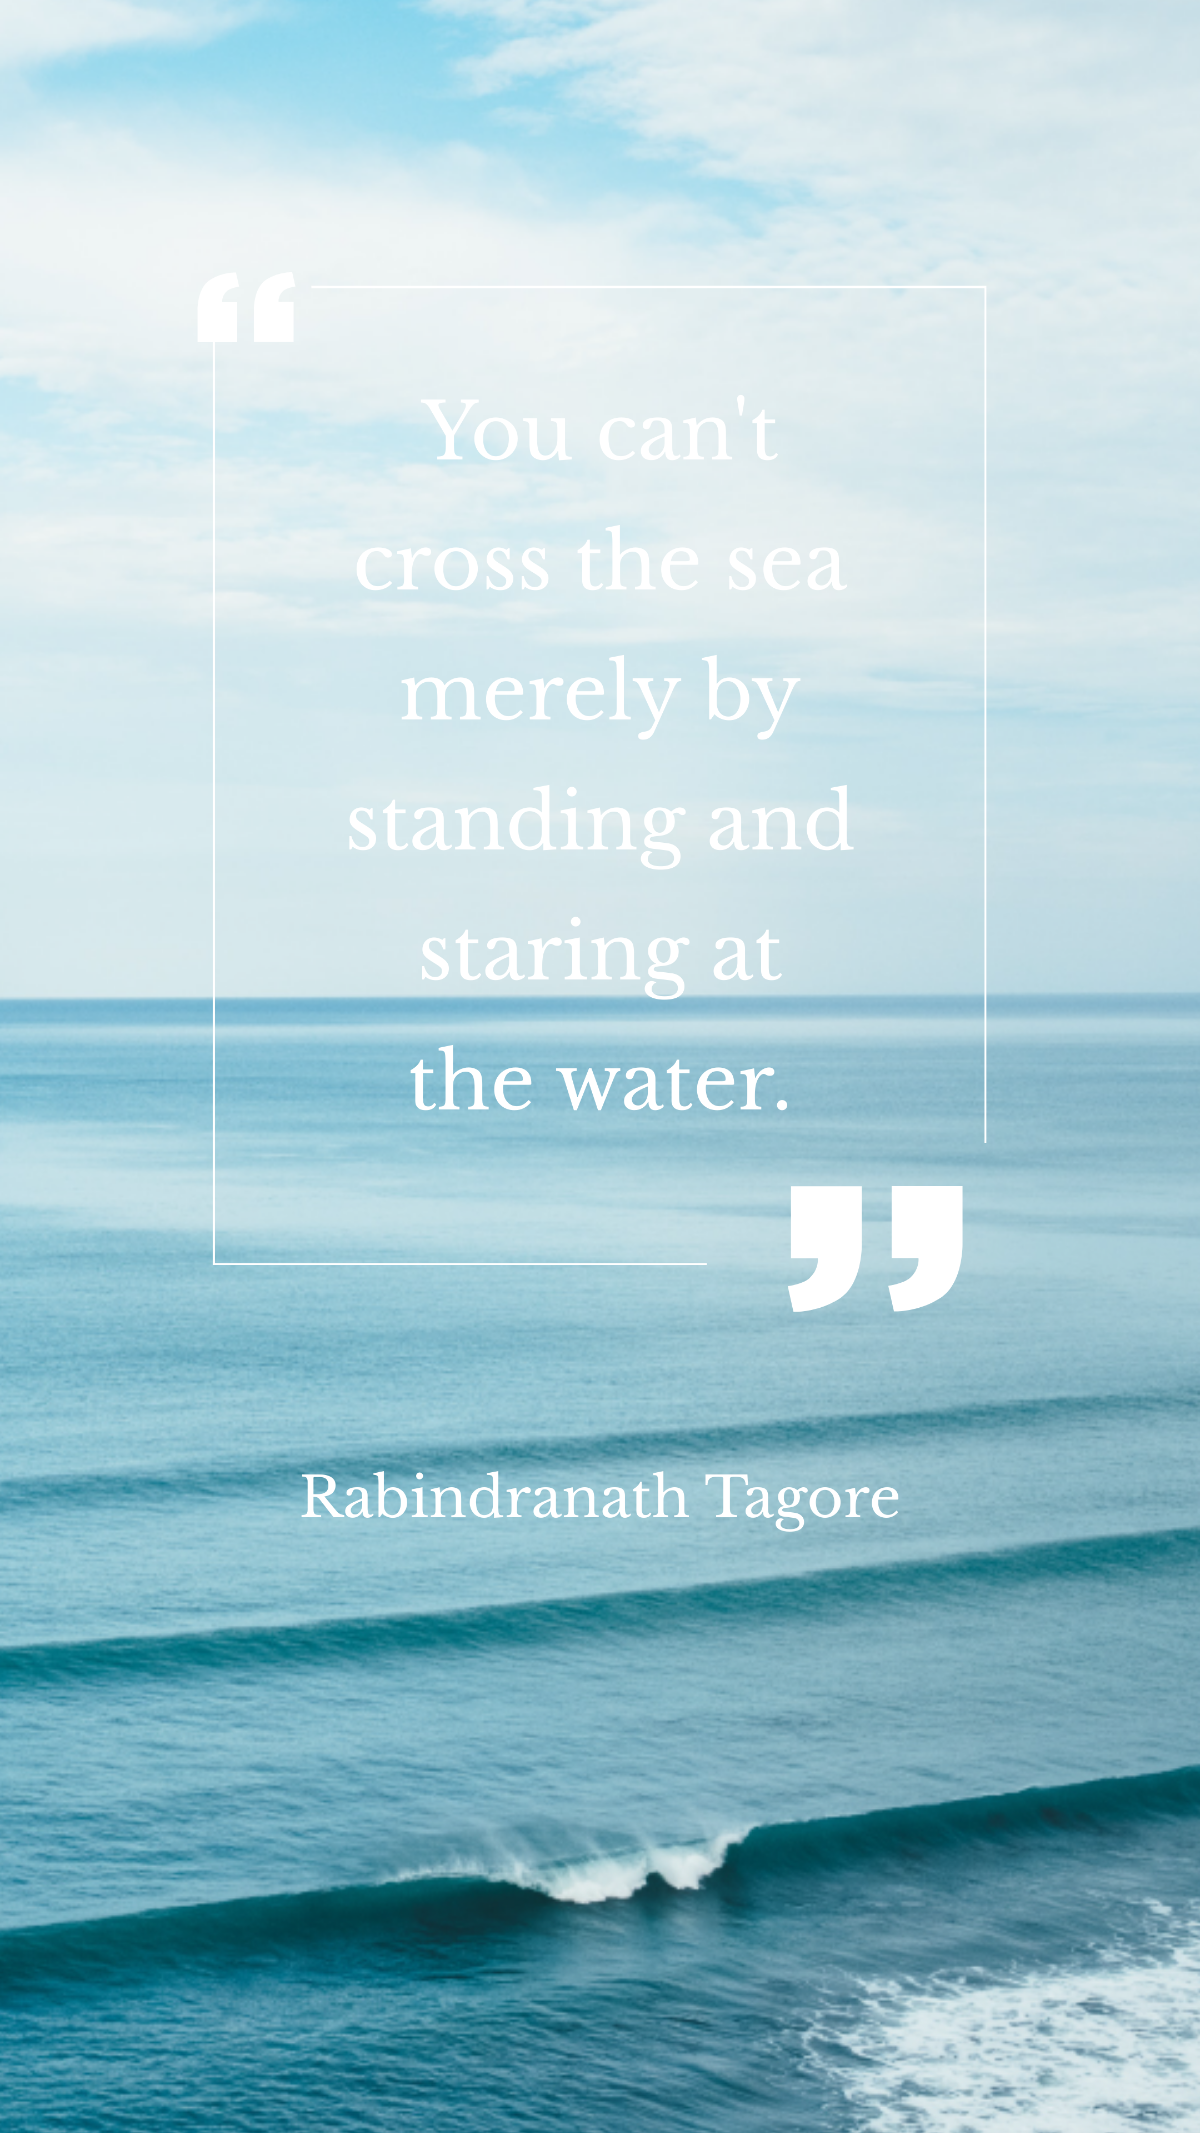 Rabindranath Tagore - You can't cross the sea merely by standing and staring at the water. Template